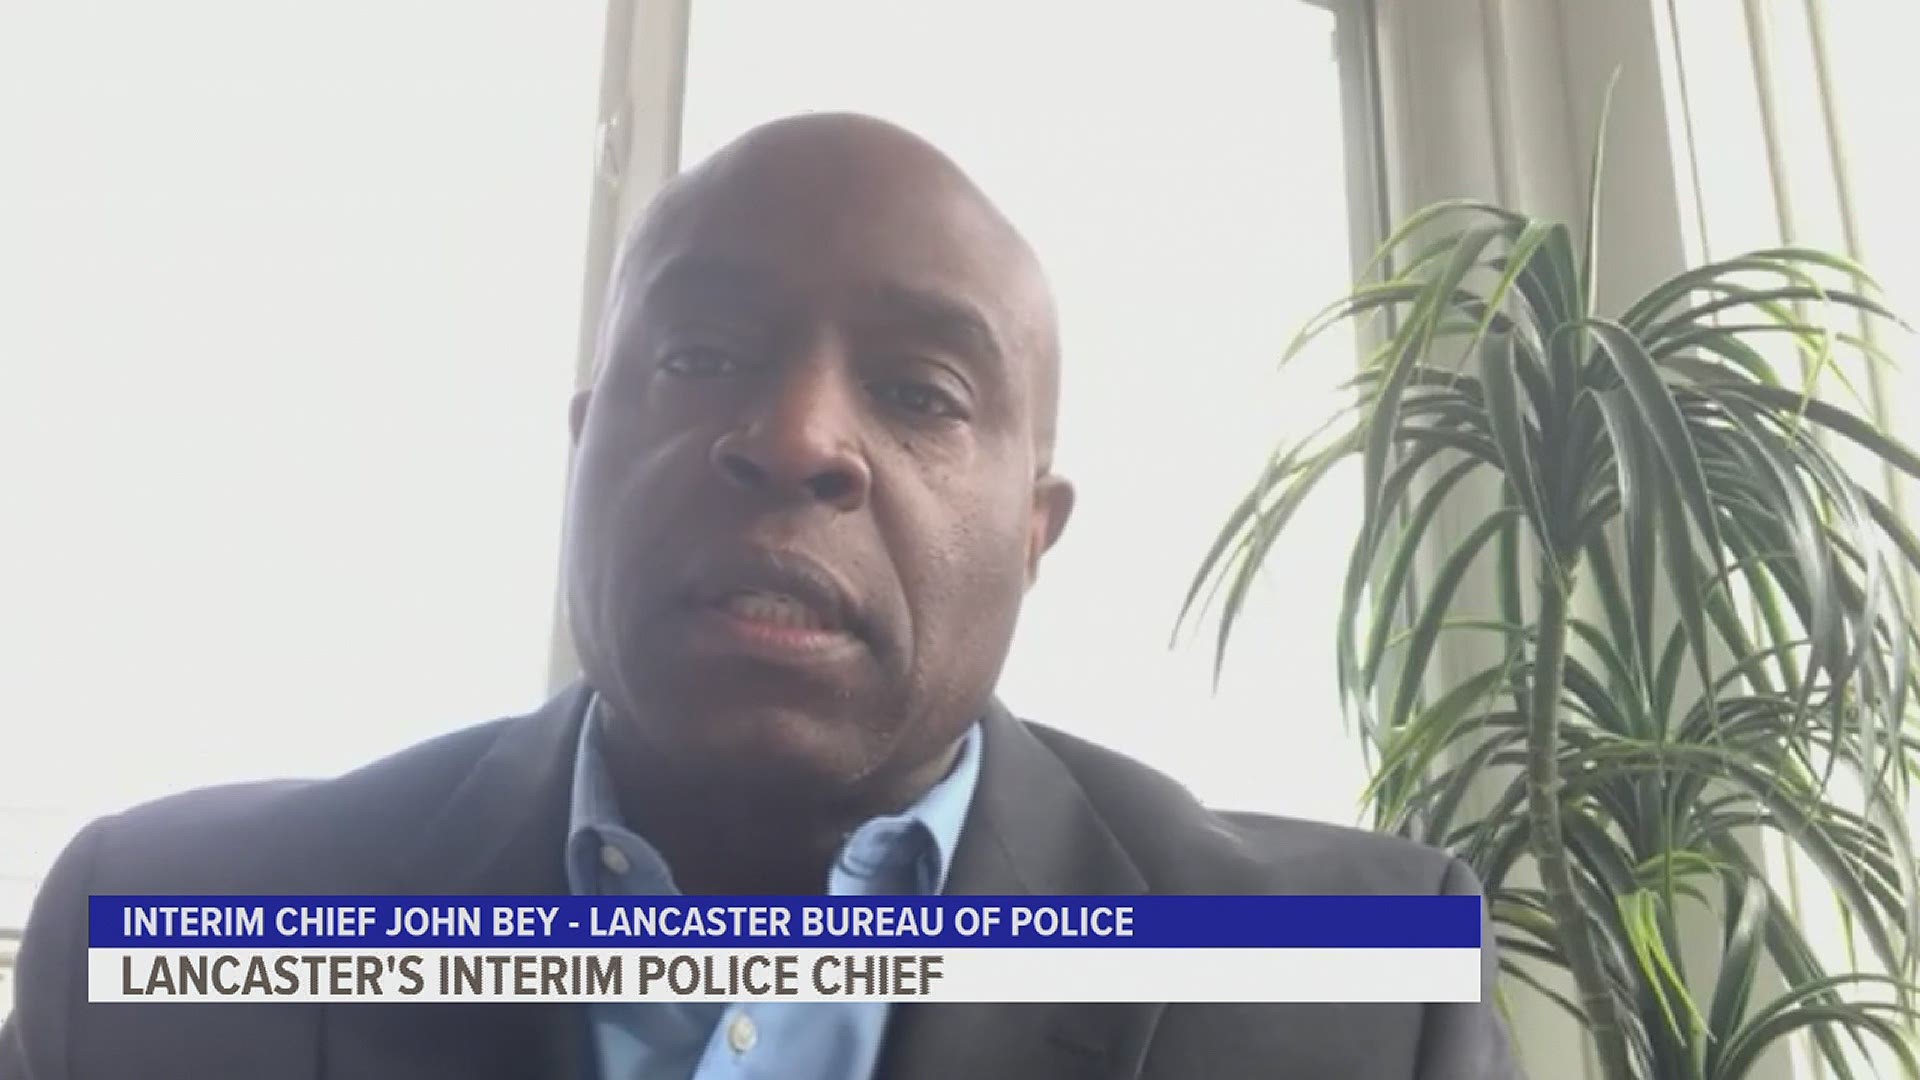 "I'm stepping into this position as Chief of Police. I'm not coming in to warm a chair," said John Bey during an interview Wednesday afternoon.